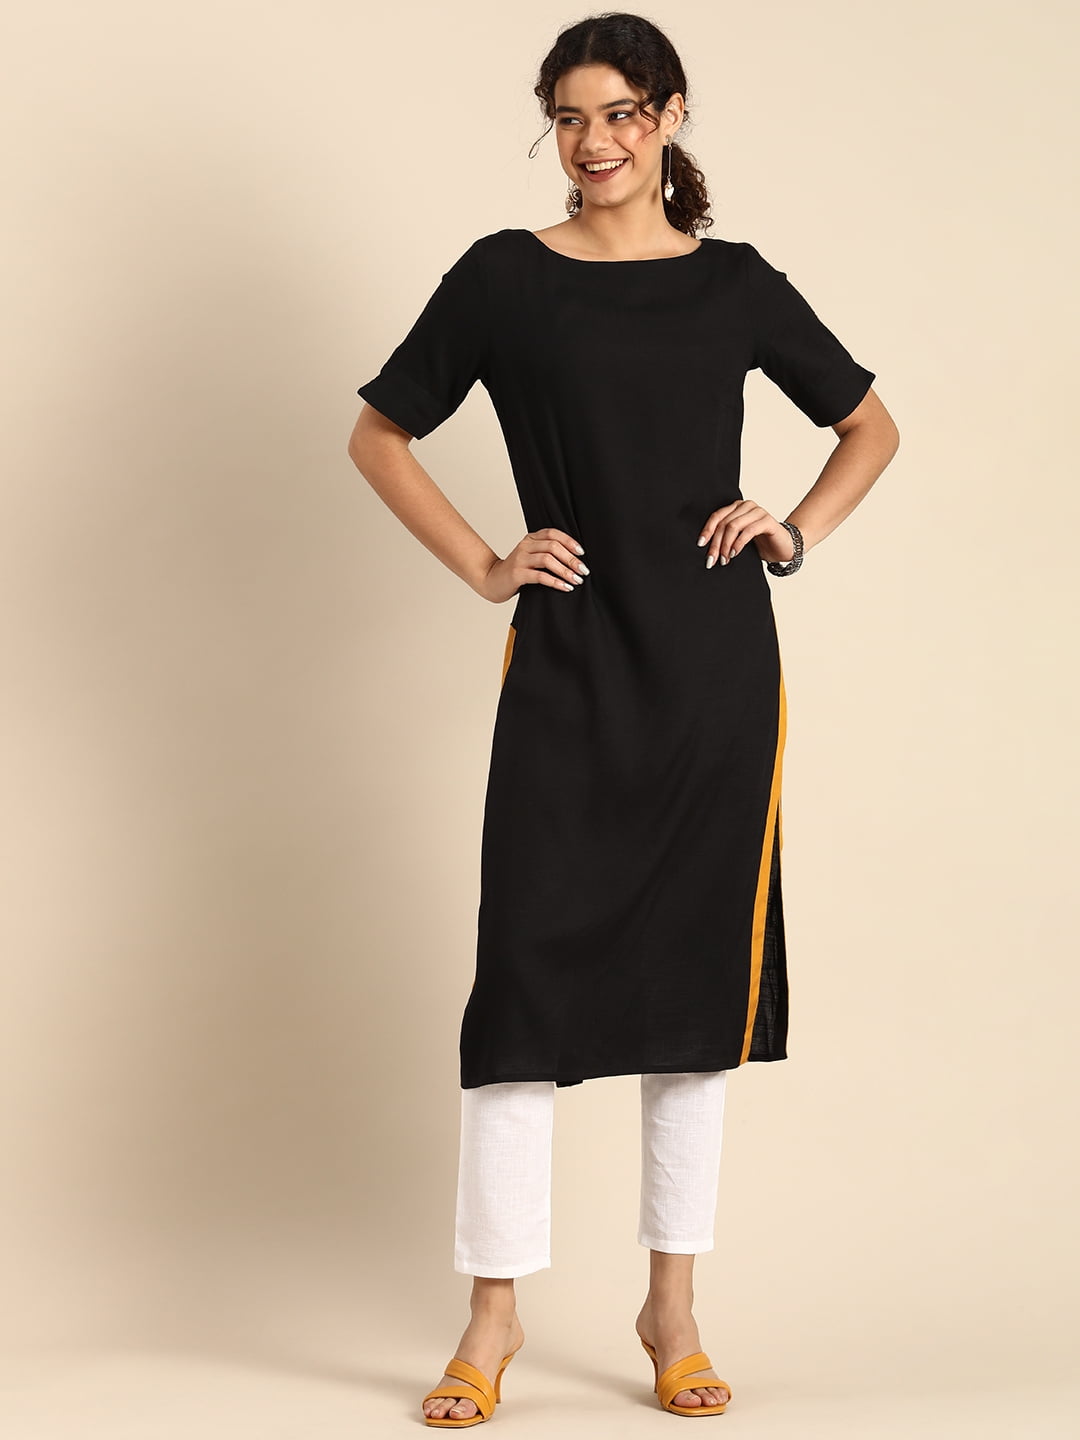 Top 4 Designer Kurti Designs For You to Try